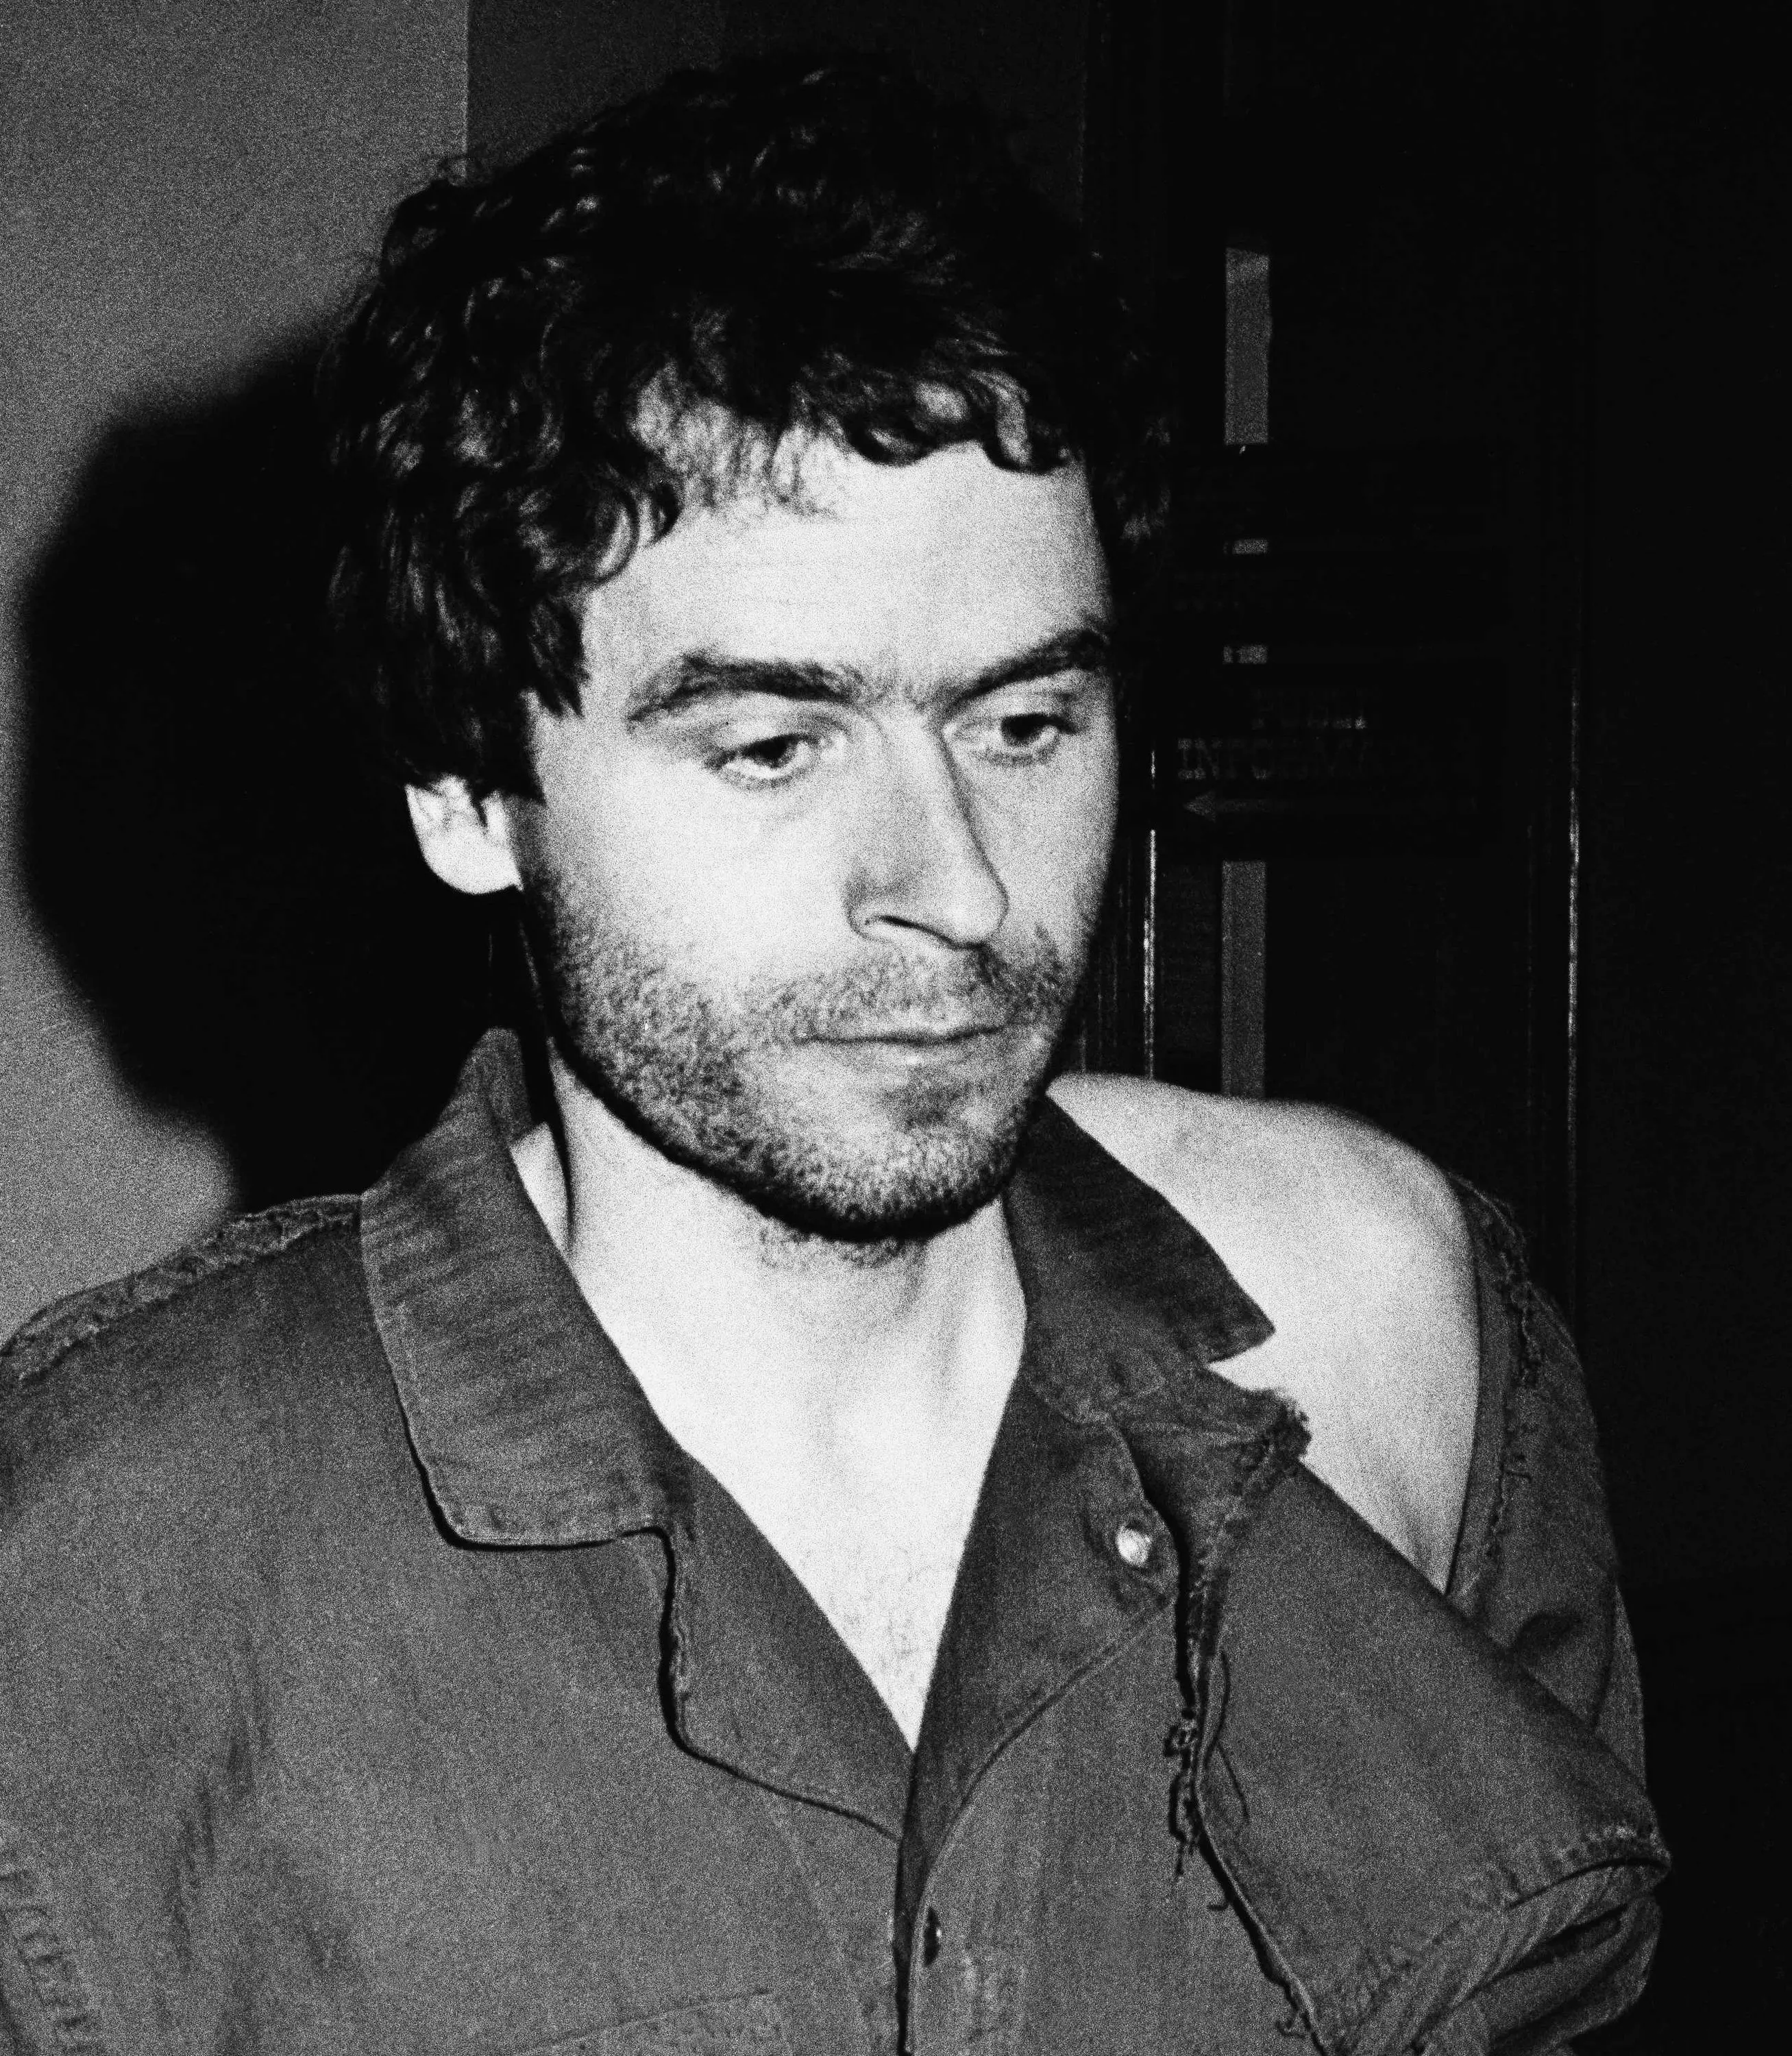 Ted Bundy is one of America's most notorious serial killers (